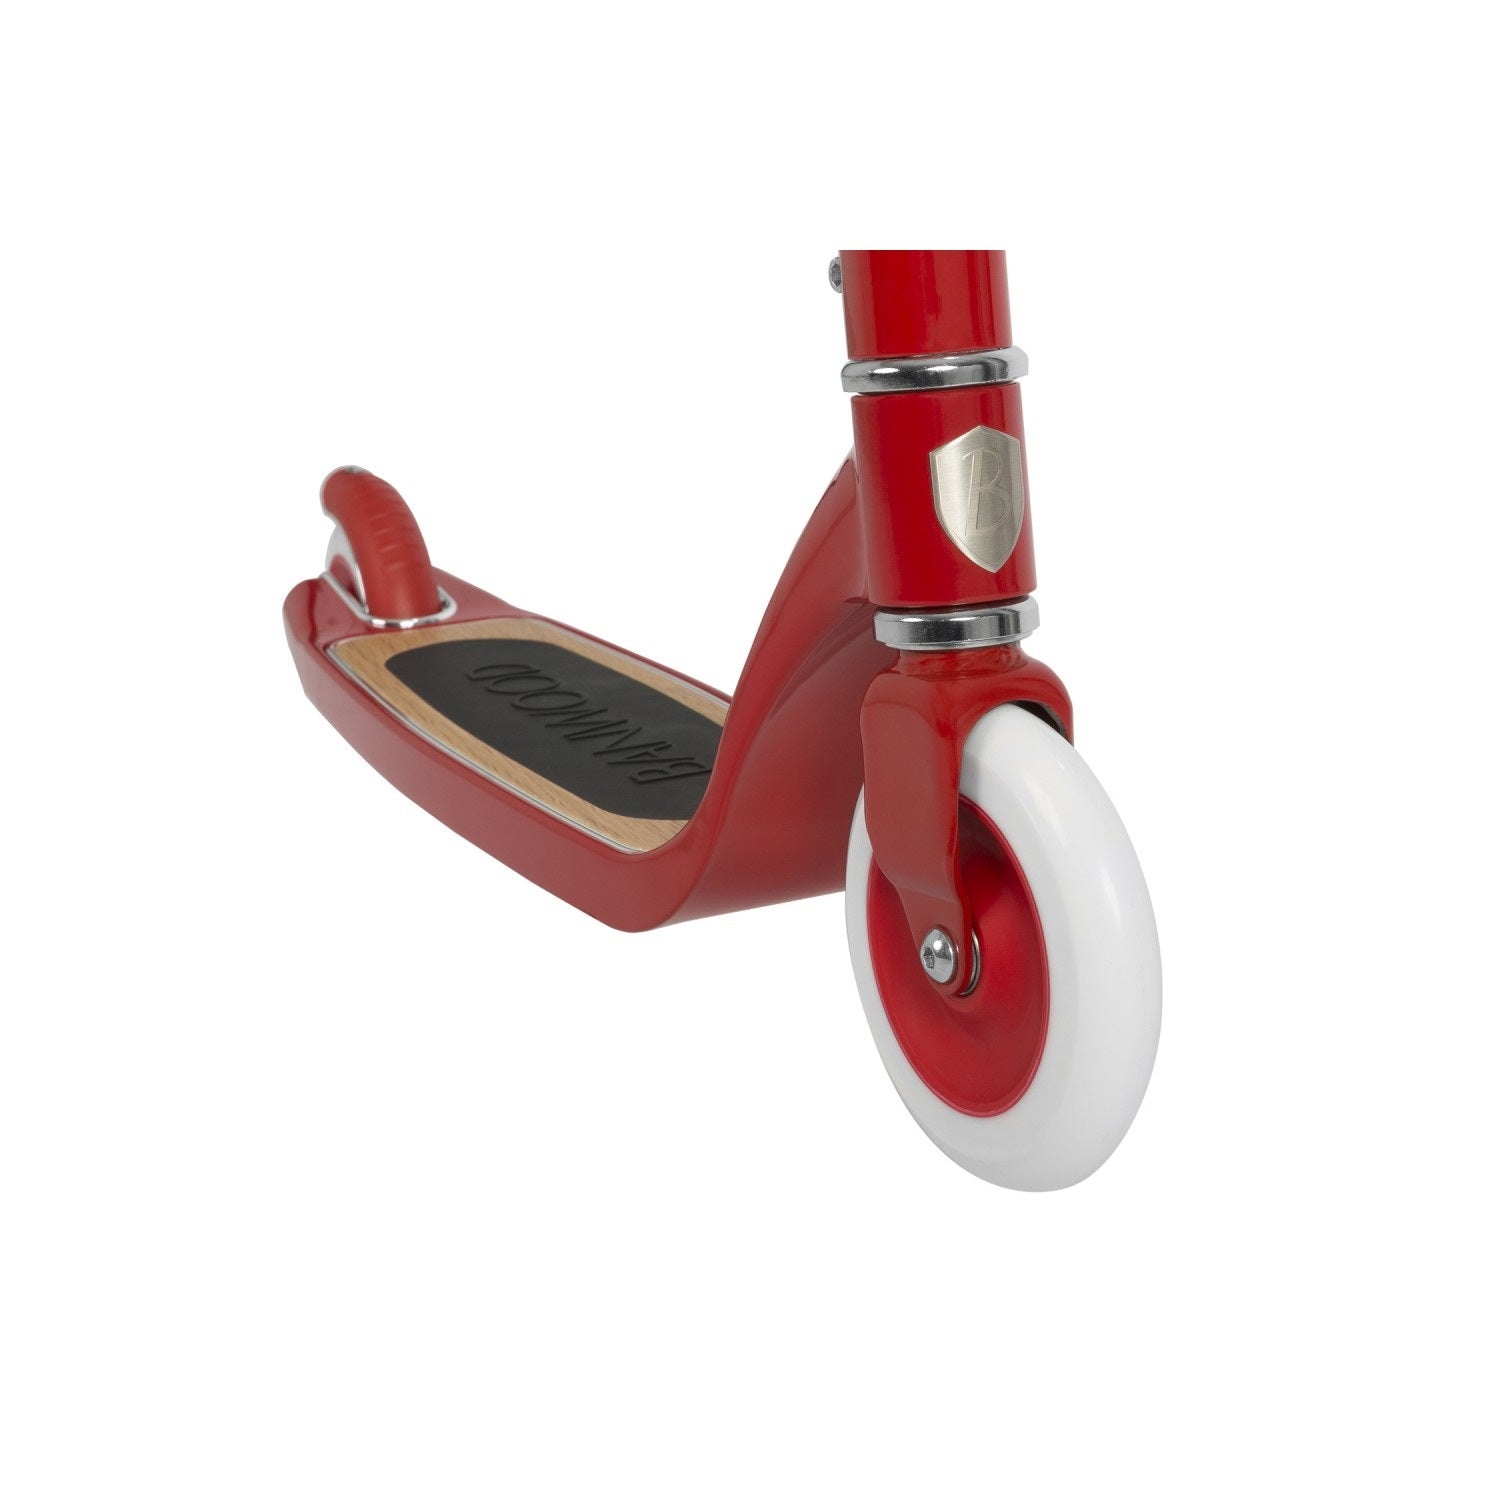 Banwood Maxi Scooter - Red